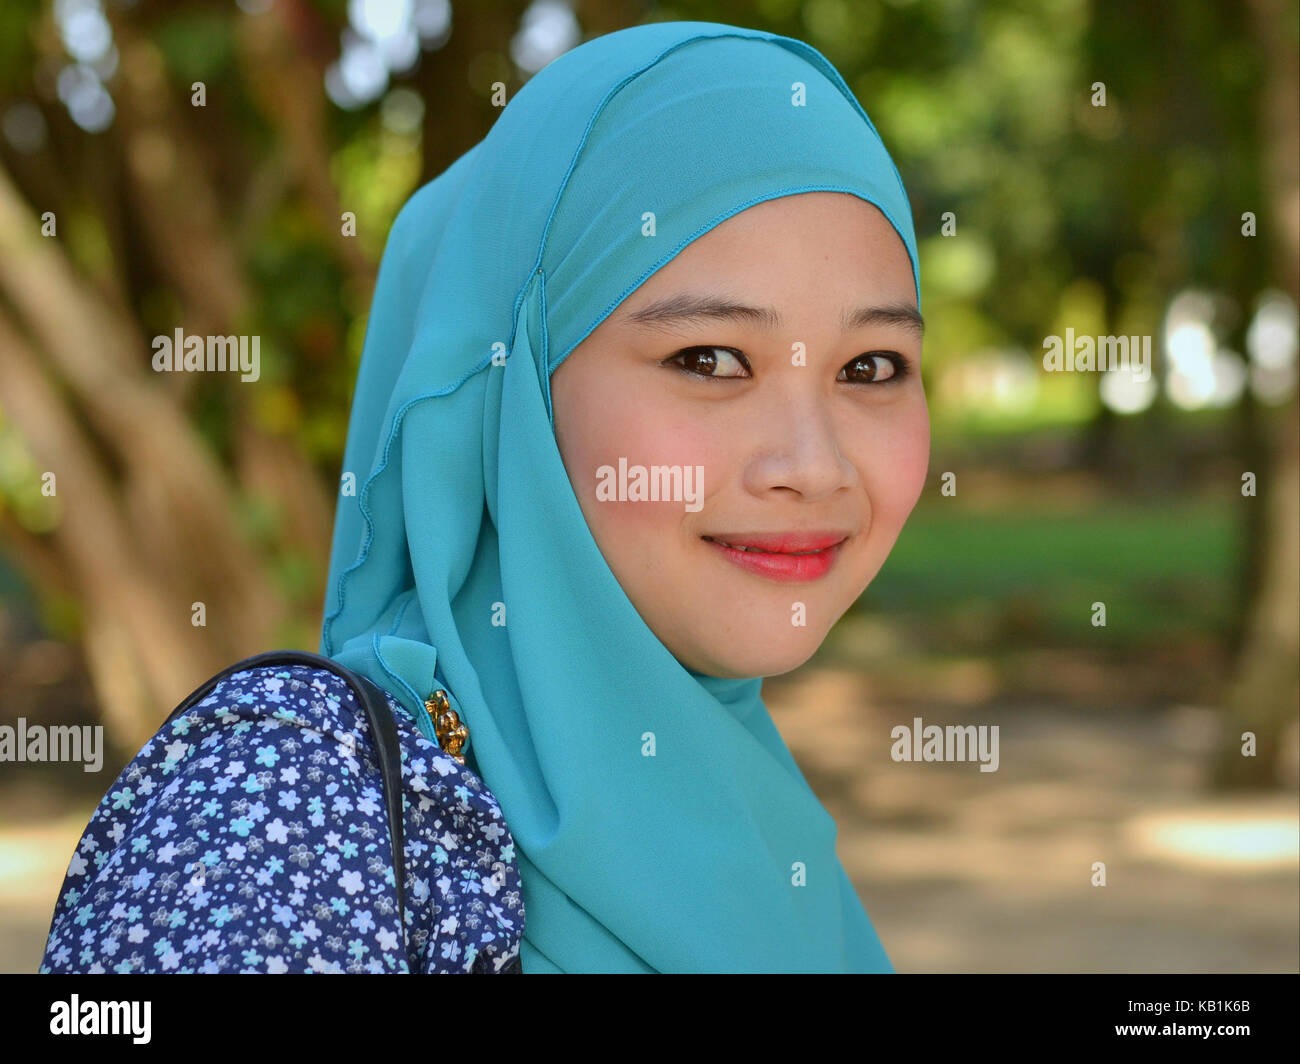 Beautiful, young Muslim woman from Malaysia, wearing a stylish turquoise hijab, throwing the famous Malay smile Stock Photo